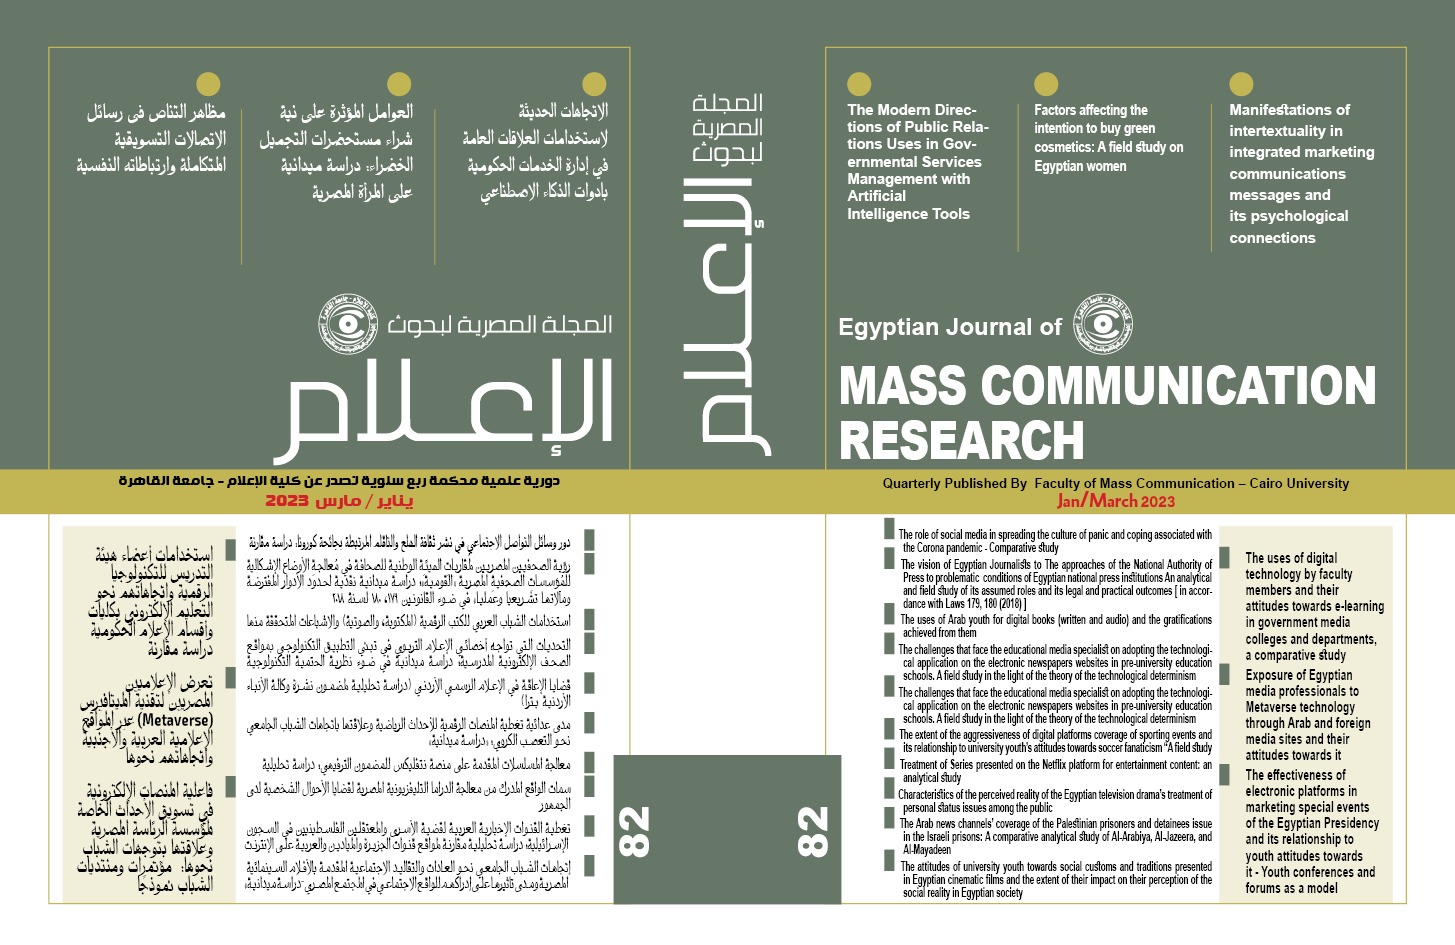 The Egyptian Journal of Media Research